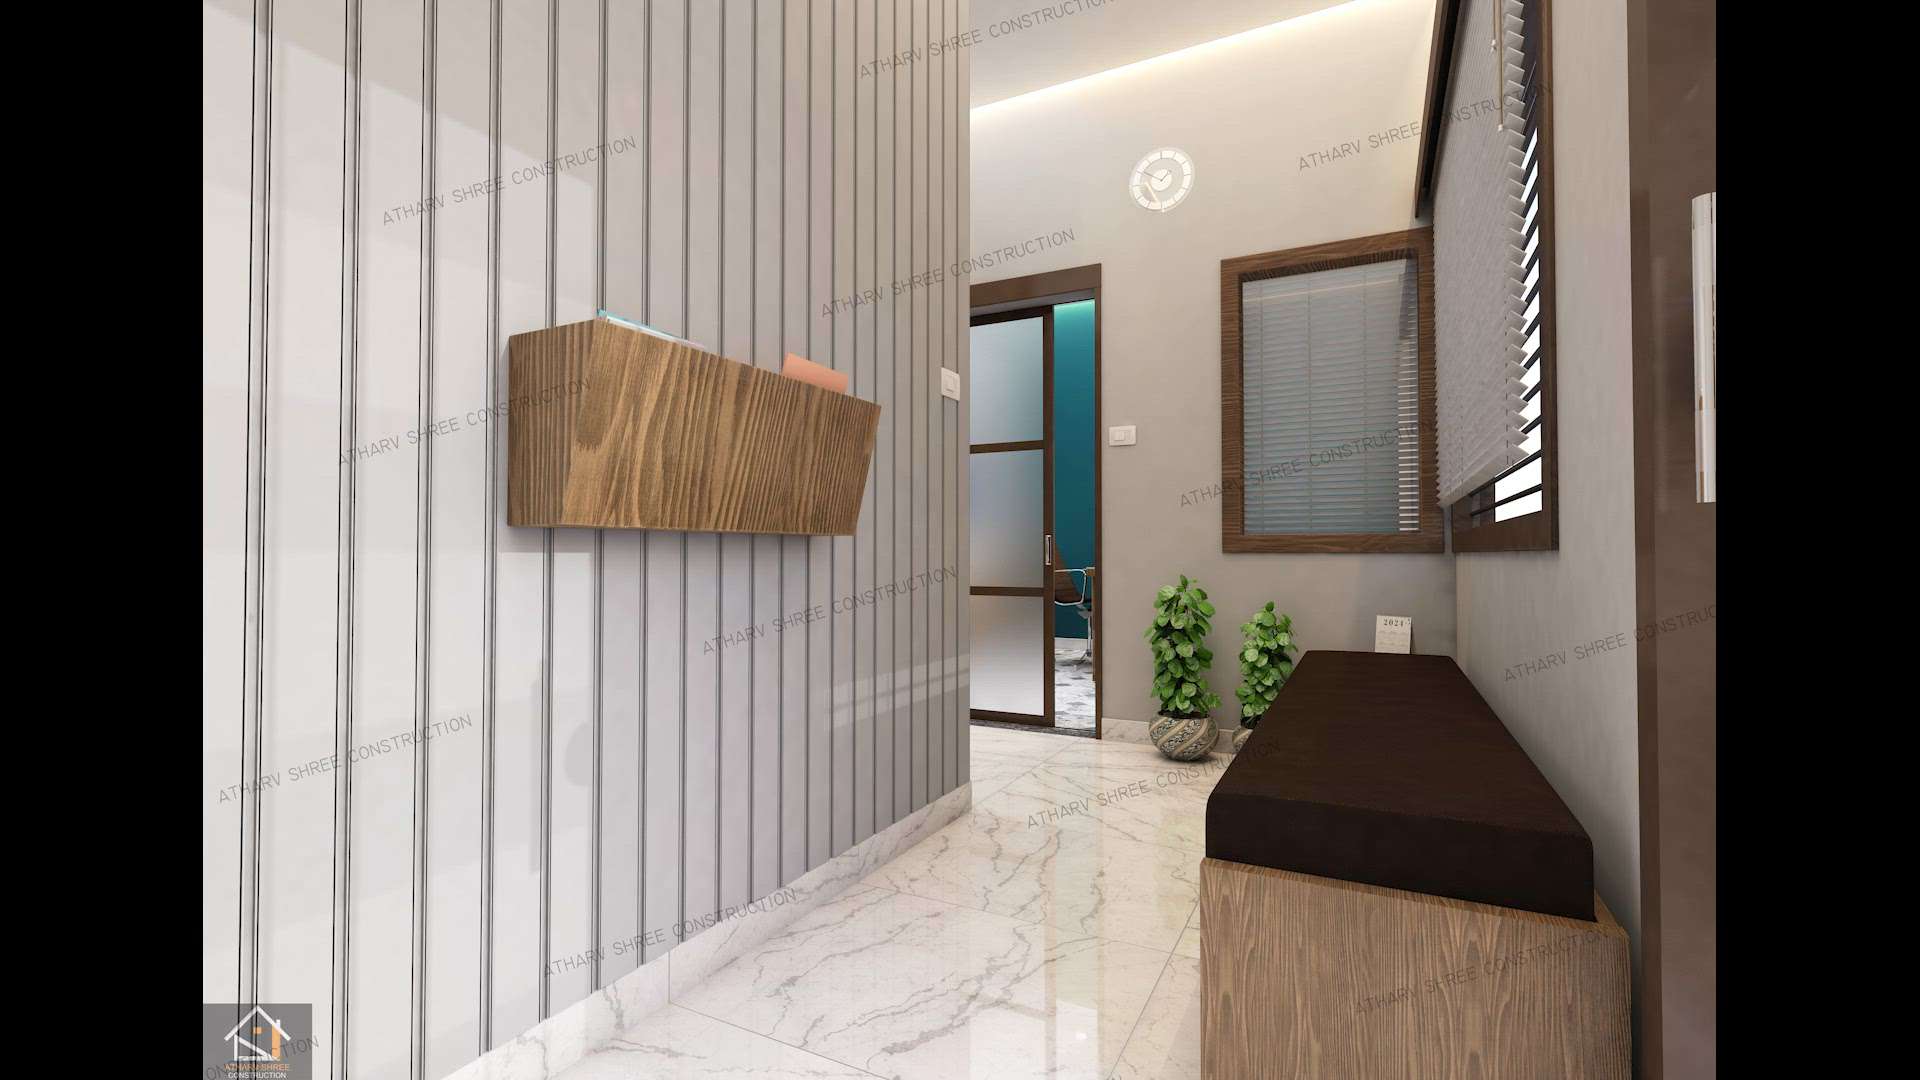 New Office Project Starting Soon...
Best quality, Reasonable rates,  Modern design. Visit our profile for more info...

 #officedesign #3DPlans #indorecity #bestquality #CivilEngineer #inderiordesigns  #Architectural&Interior #furnitures #FlooringTiles #WallDecors #WallDesigns #walpaper #SlidingDoors